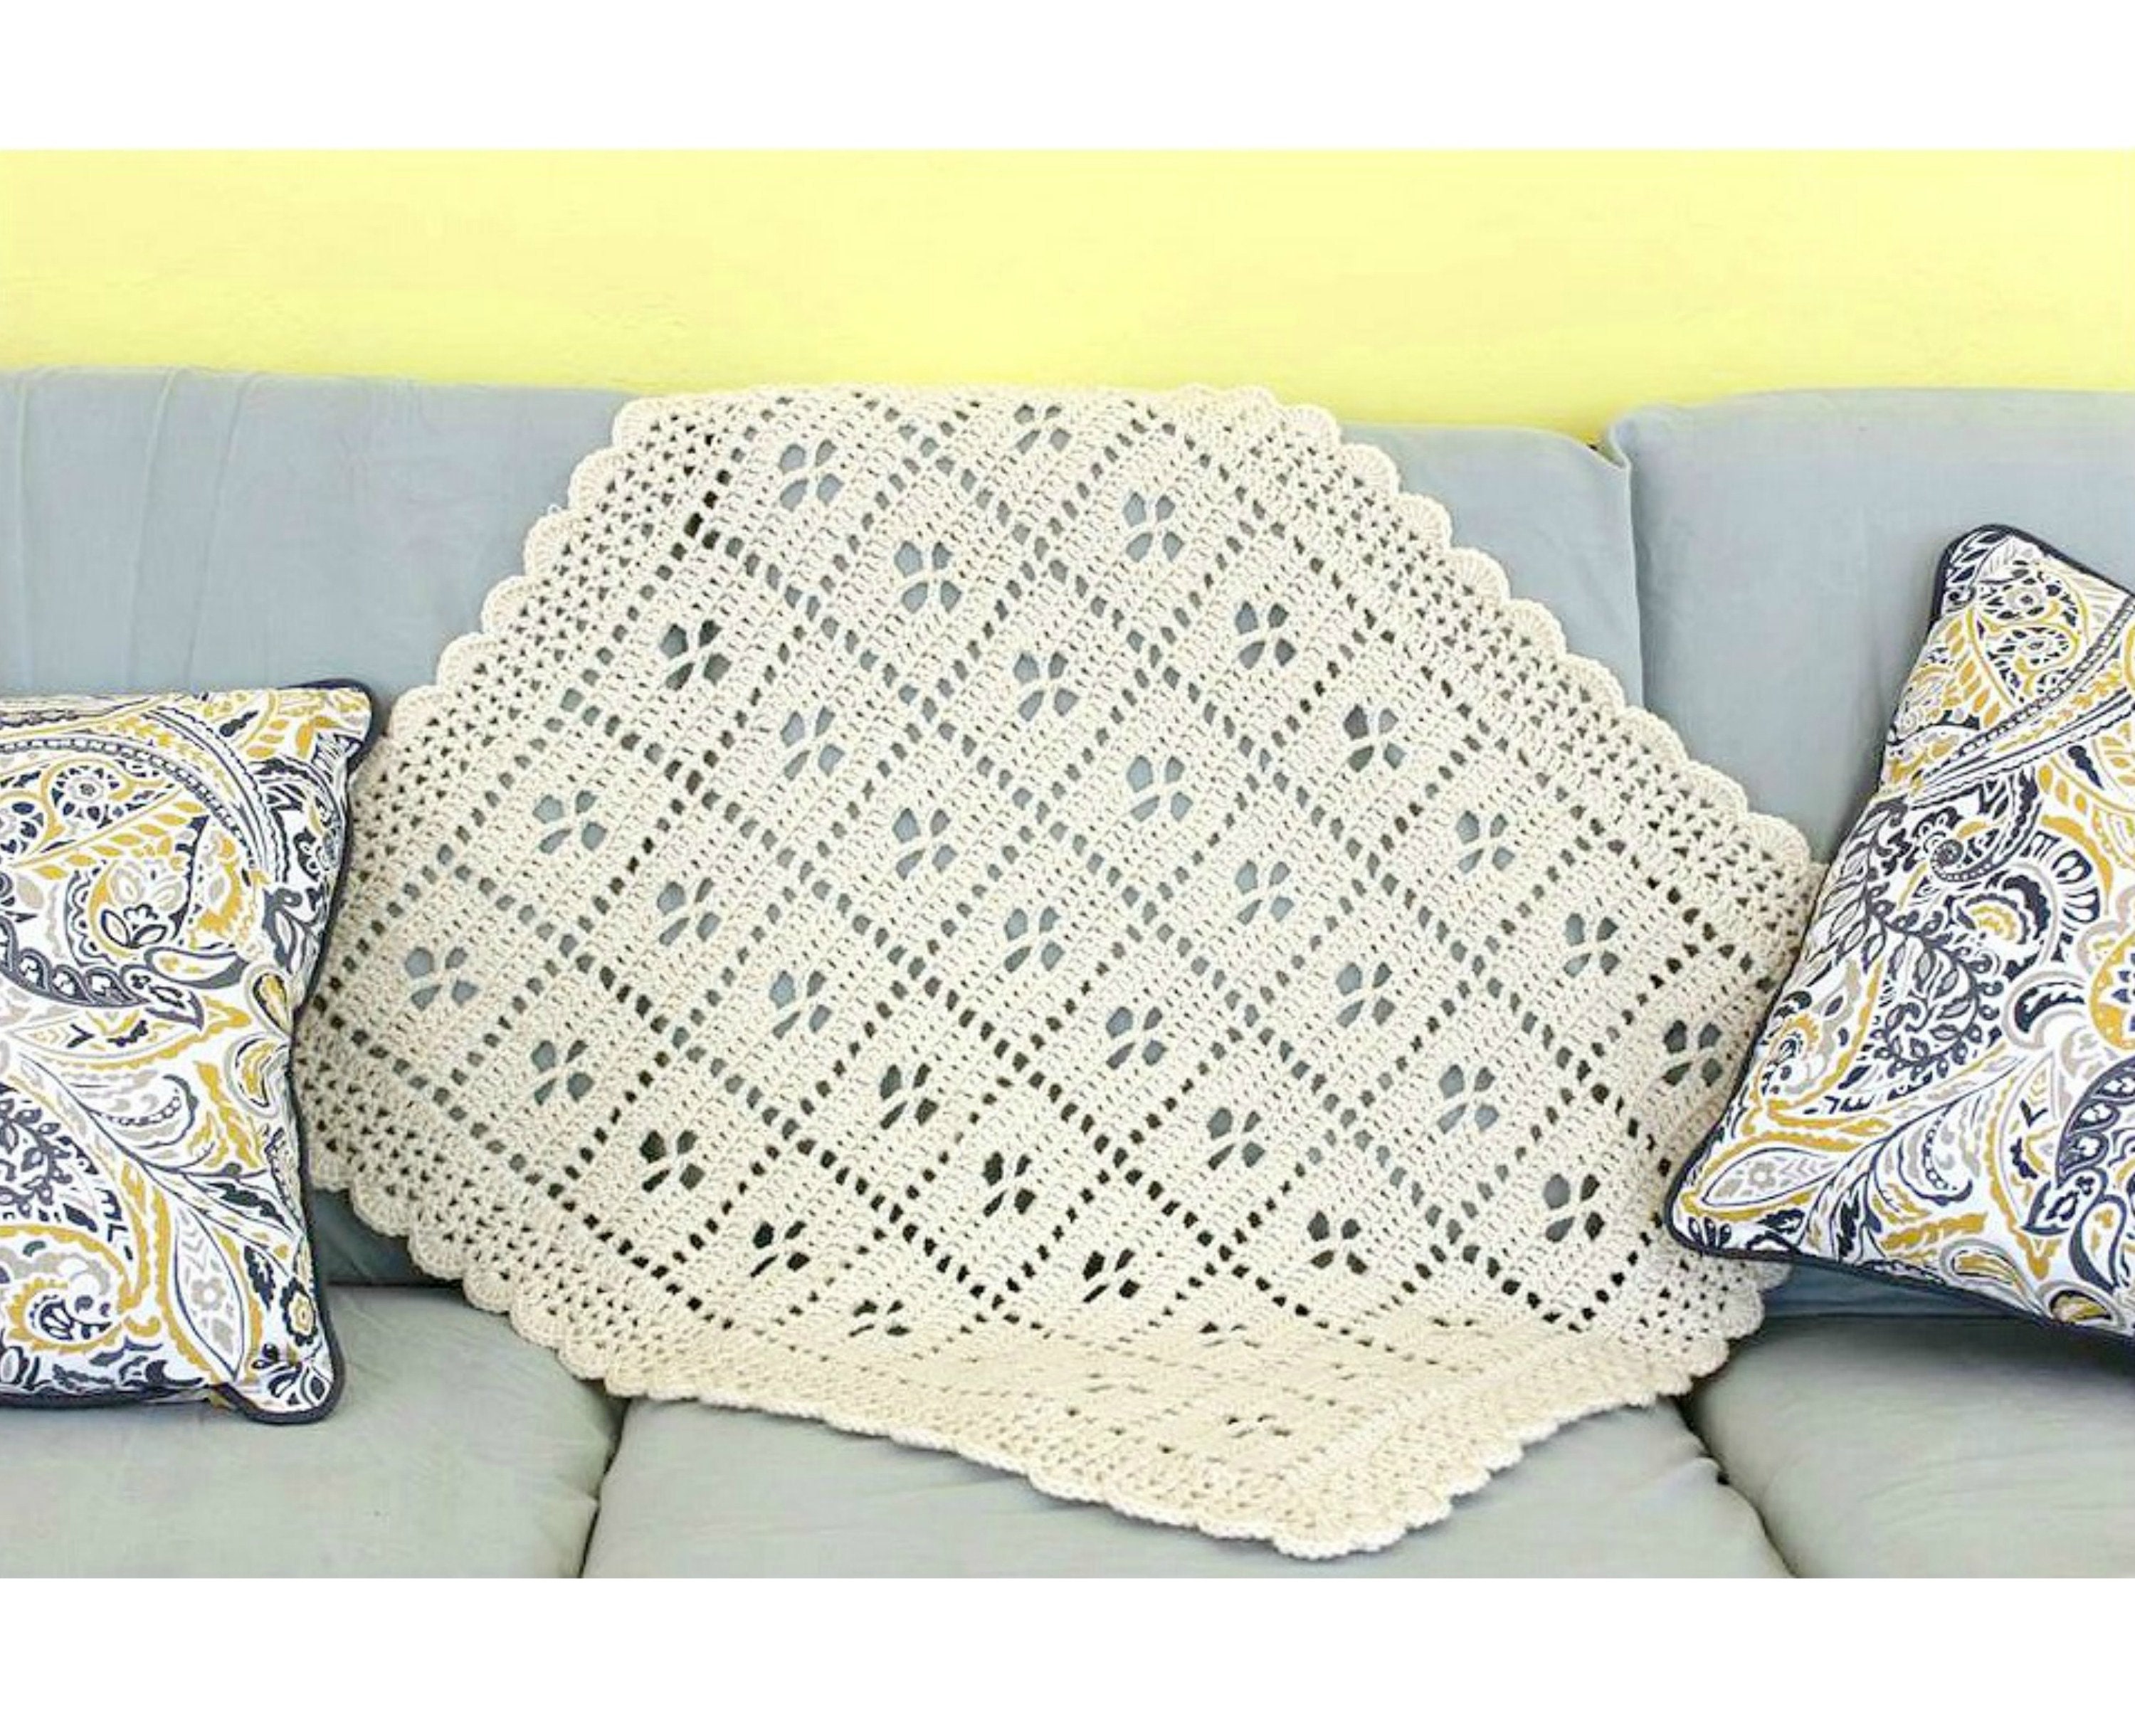 Call the Midwife Afghan Crochet Blanket Pattern